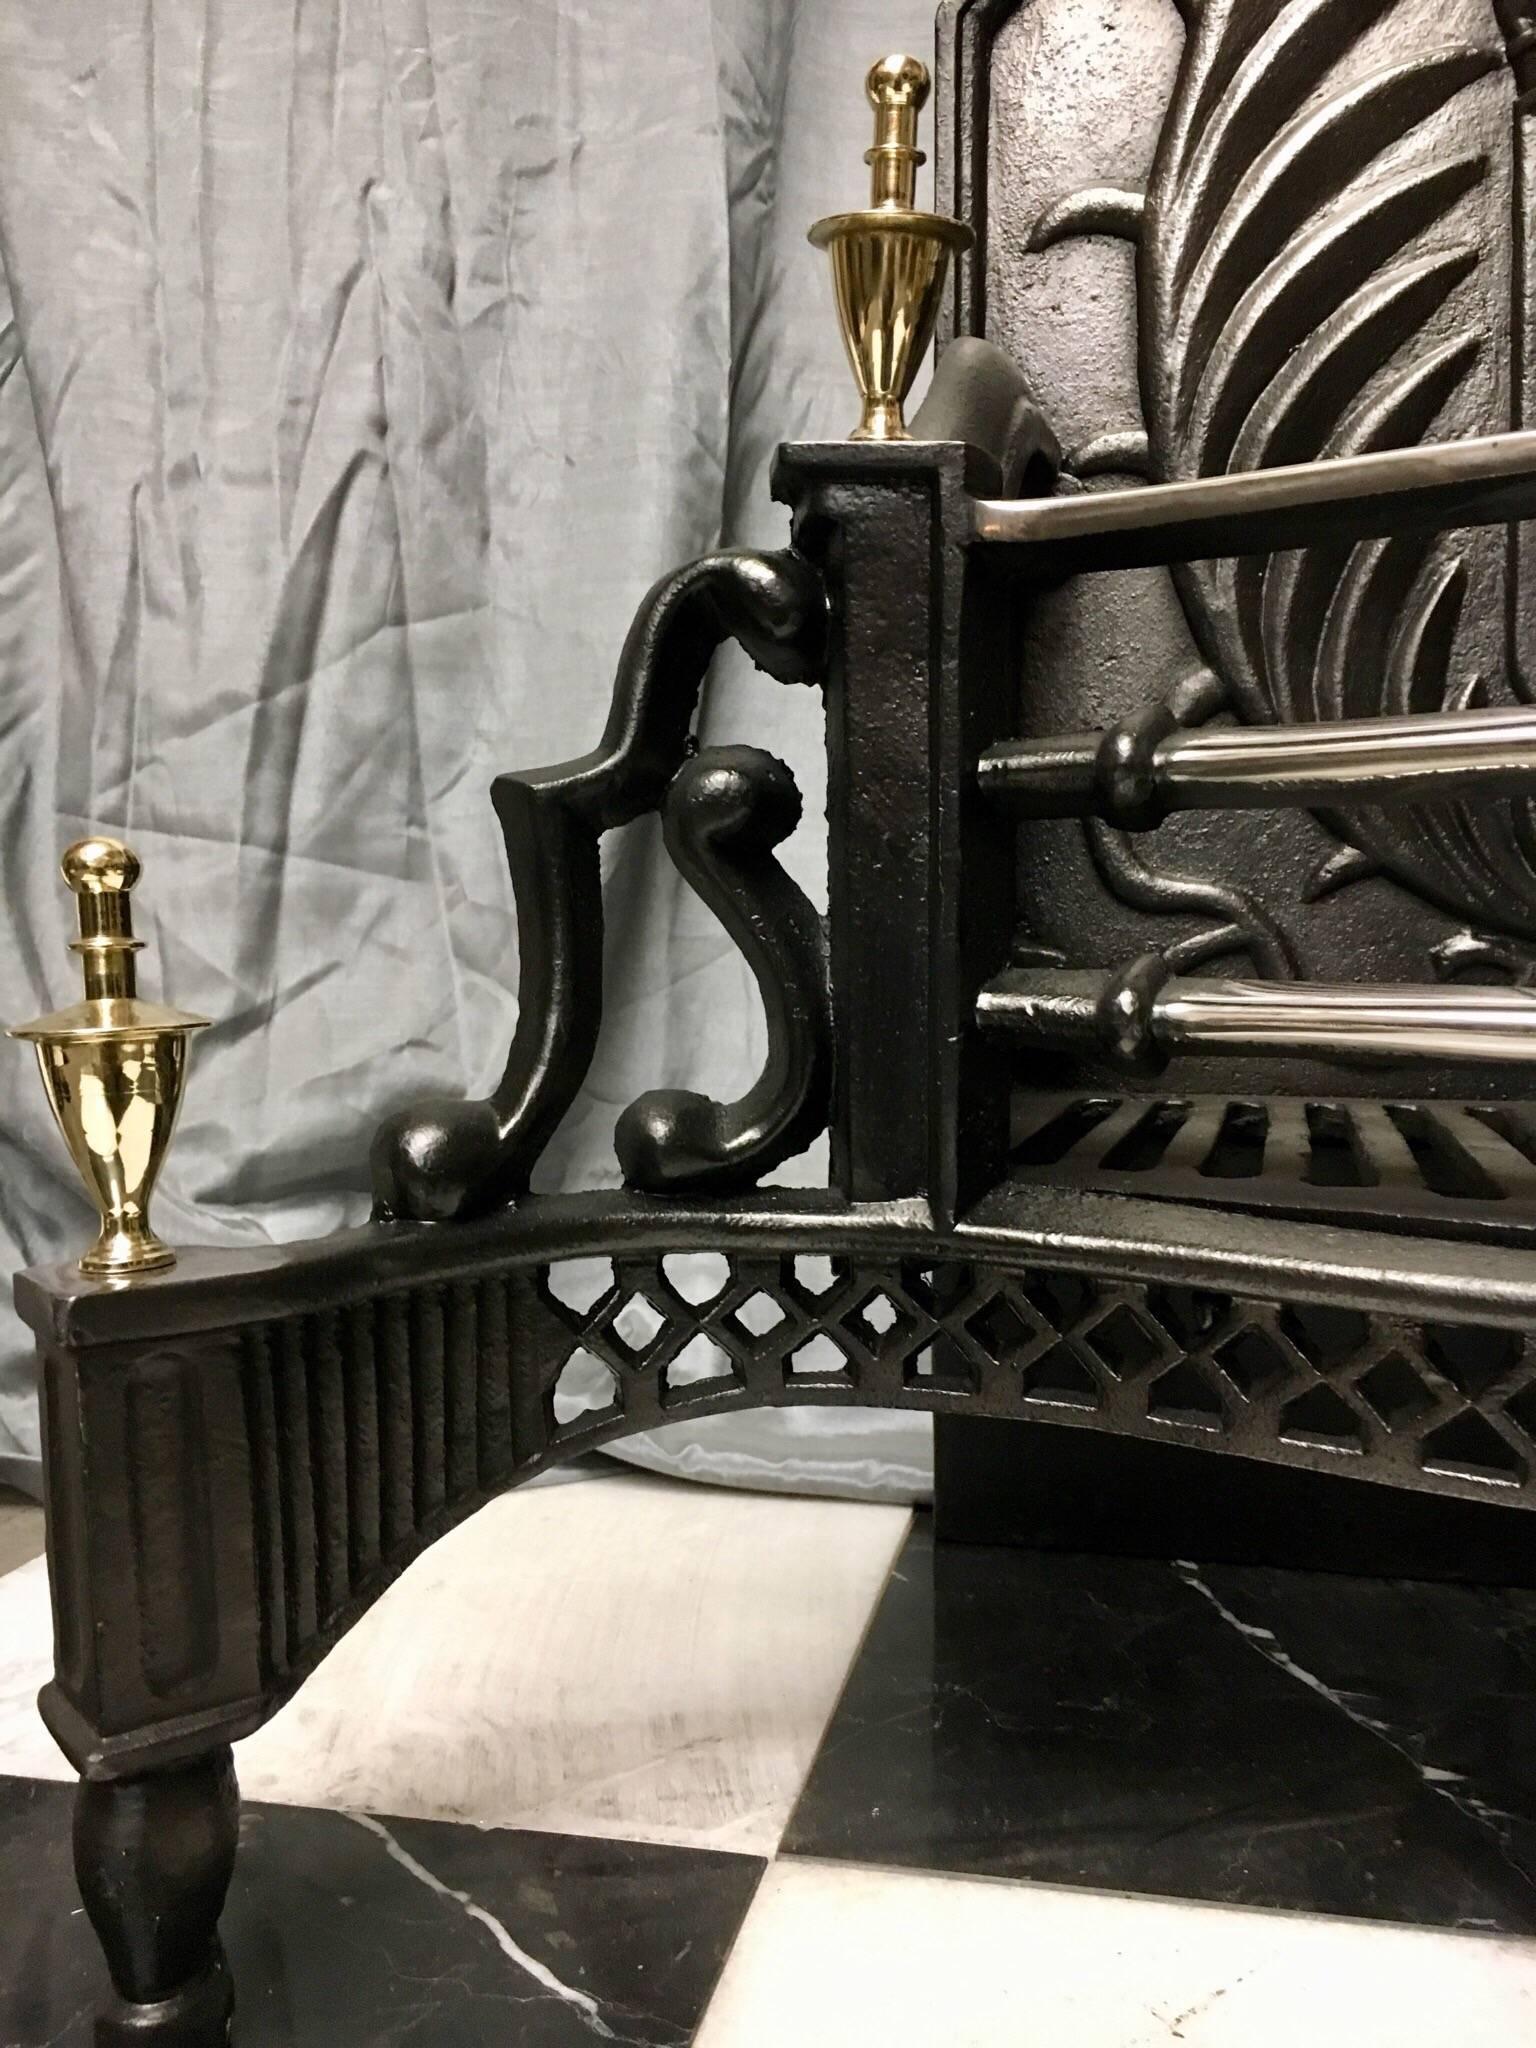 A substantial period cast iron and brass Victorian style fire grate basket, with a large shaped back with castings of a crown and shield with stylised fleur-de-lis flanked by leaf side supporters, shaped side panels connect a four bar polished grate